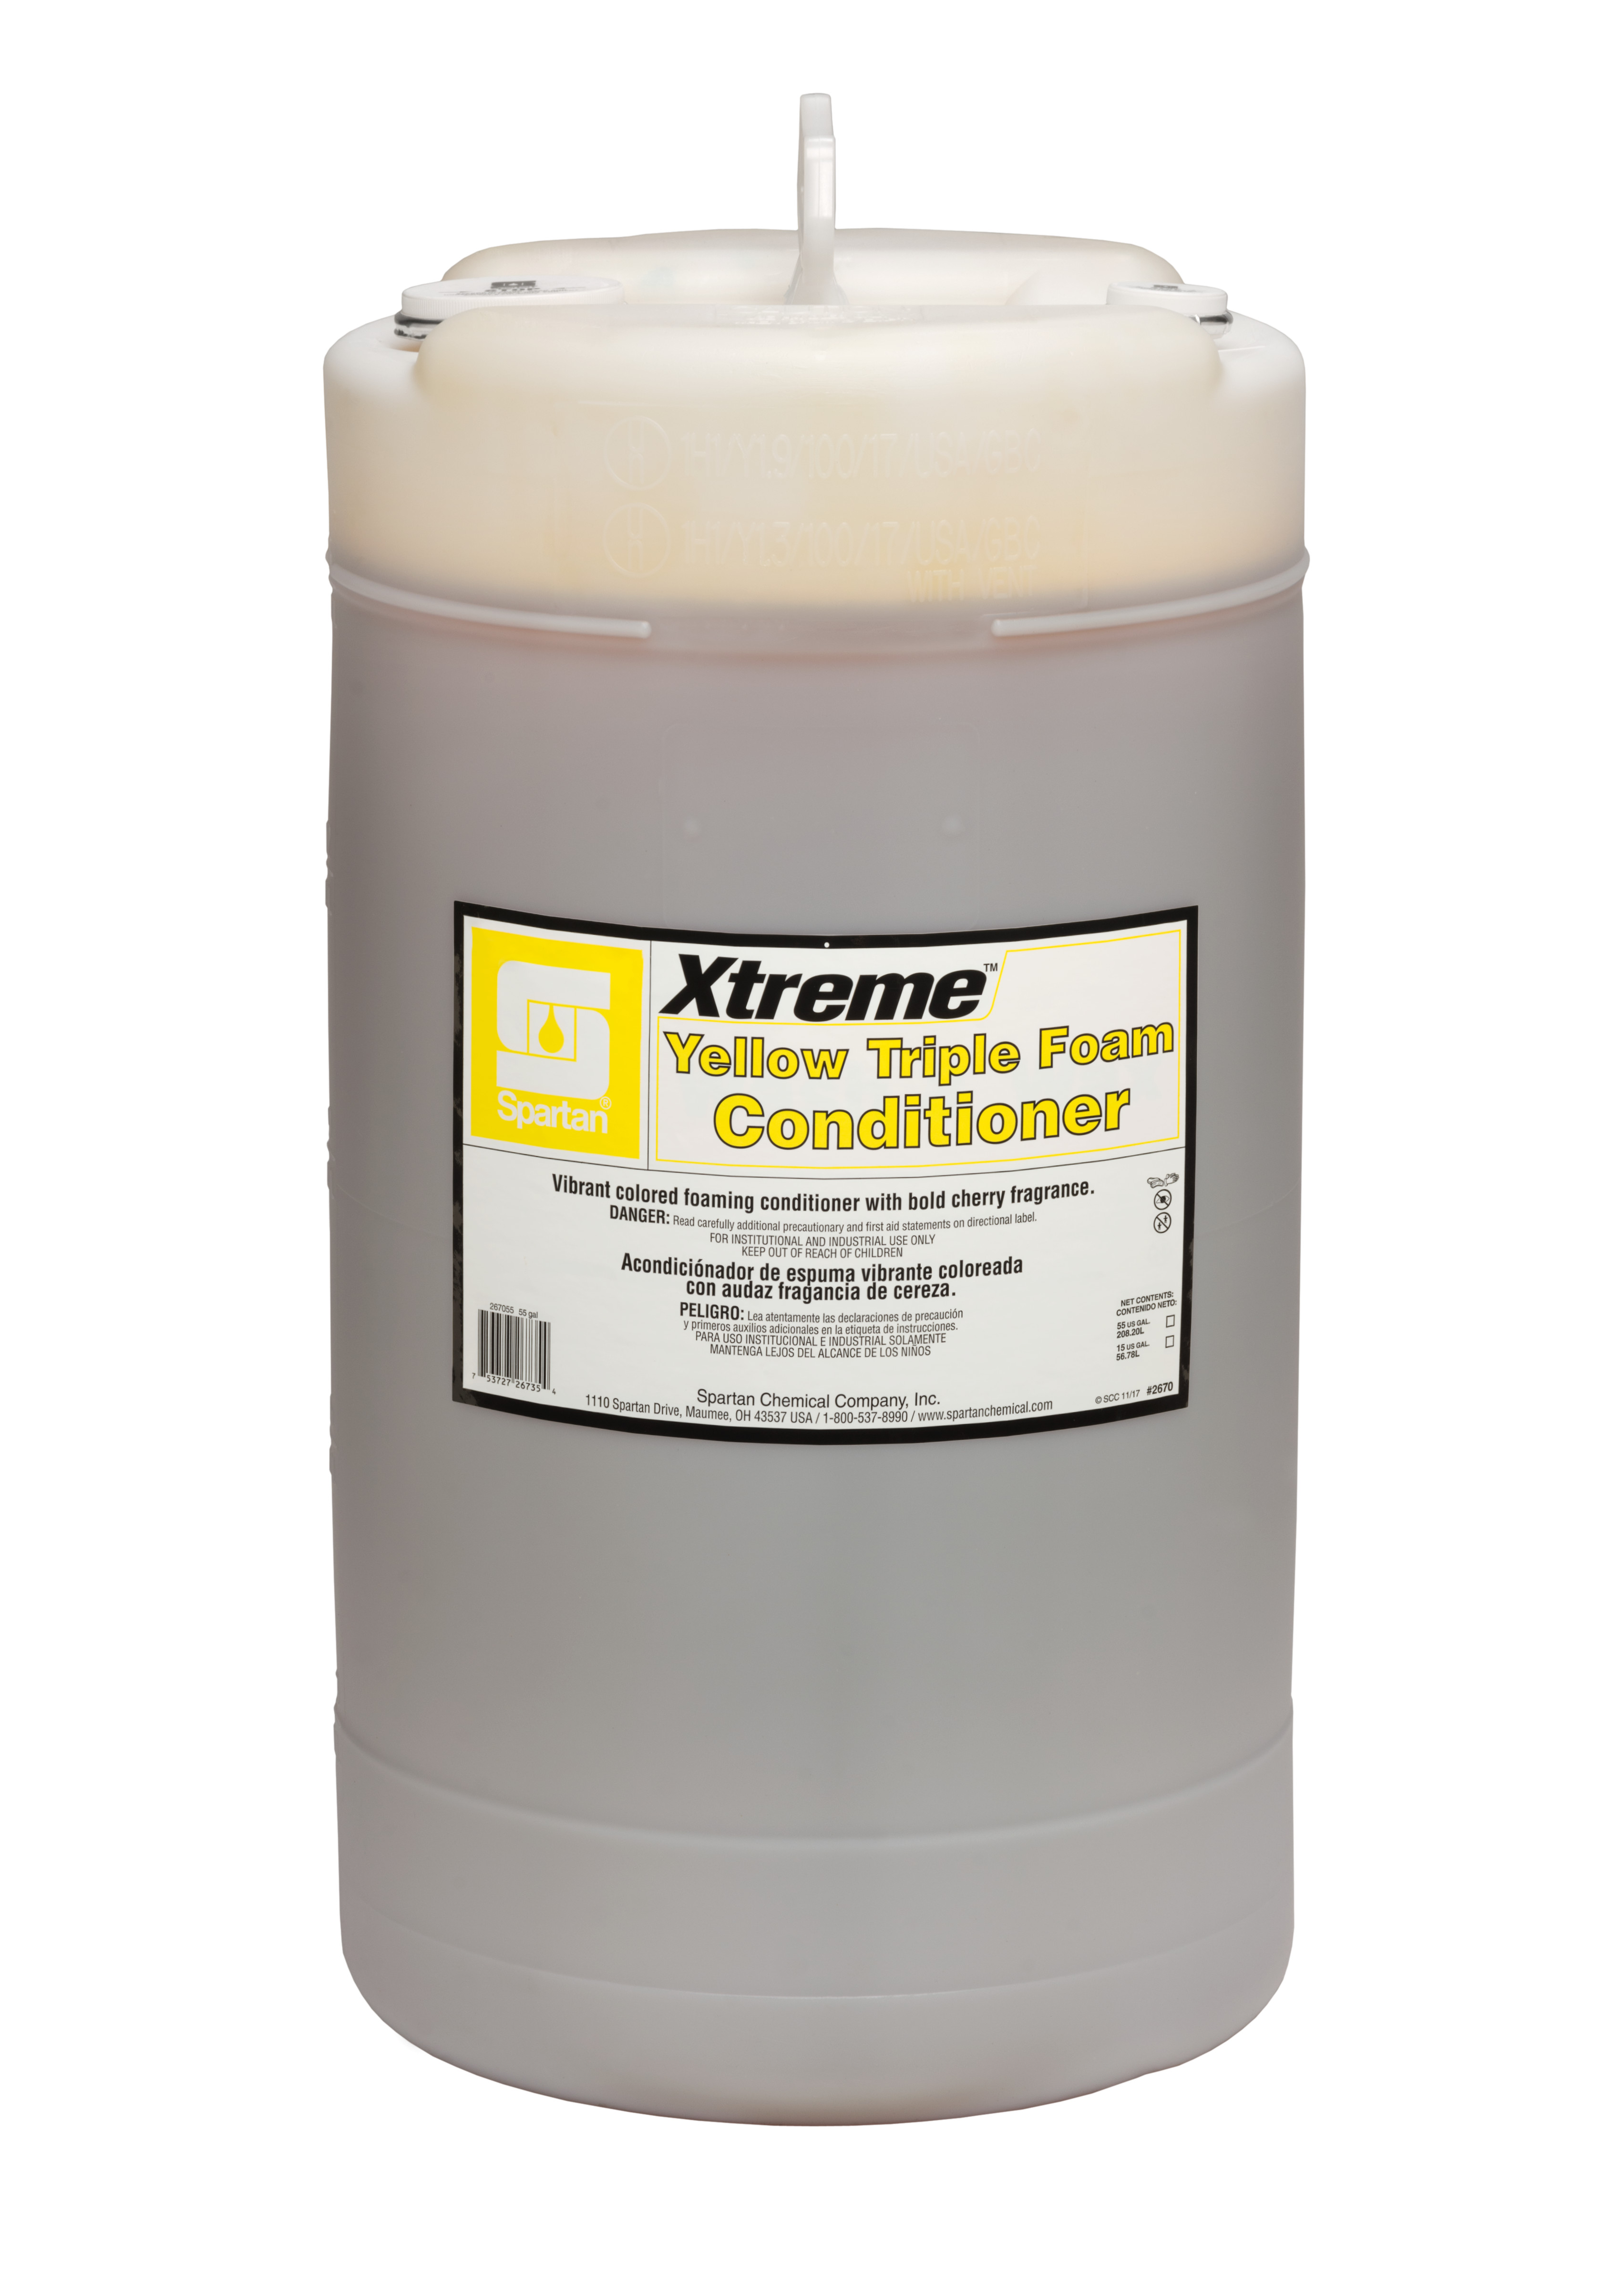 Spartan Chemical Company Xtreme Yellow Triple Foam Conditioner, 15 GAL DRUM